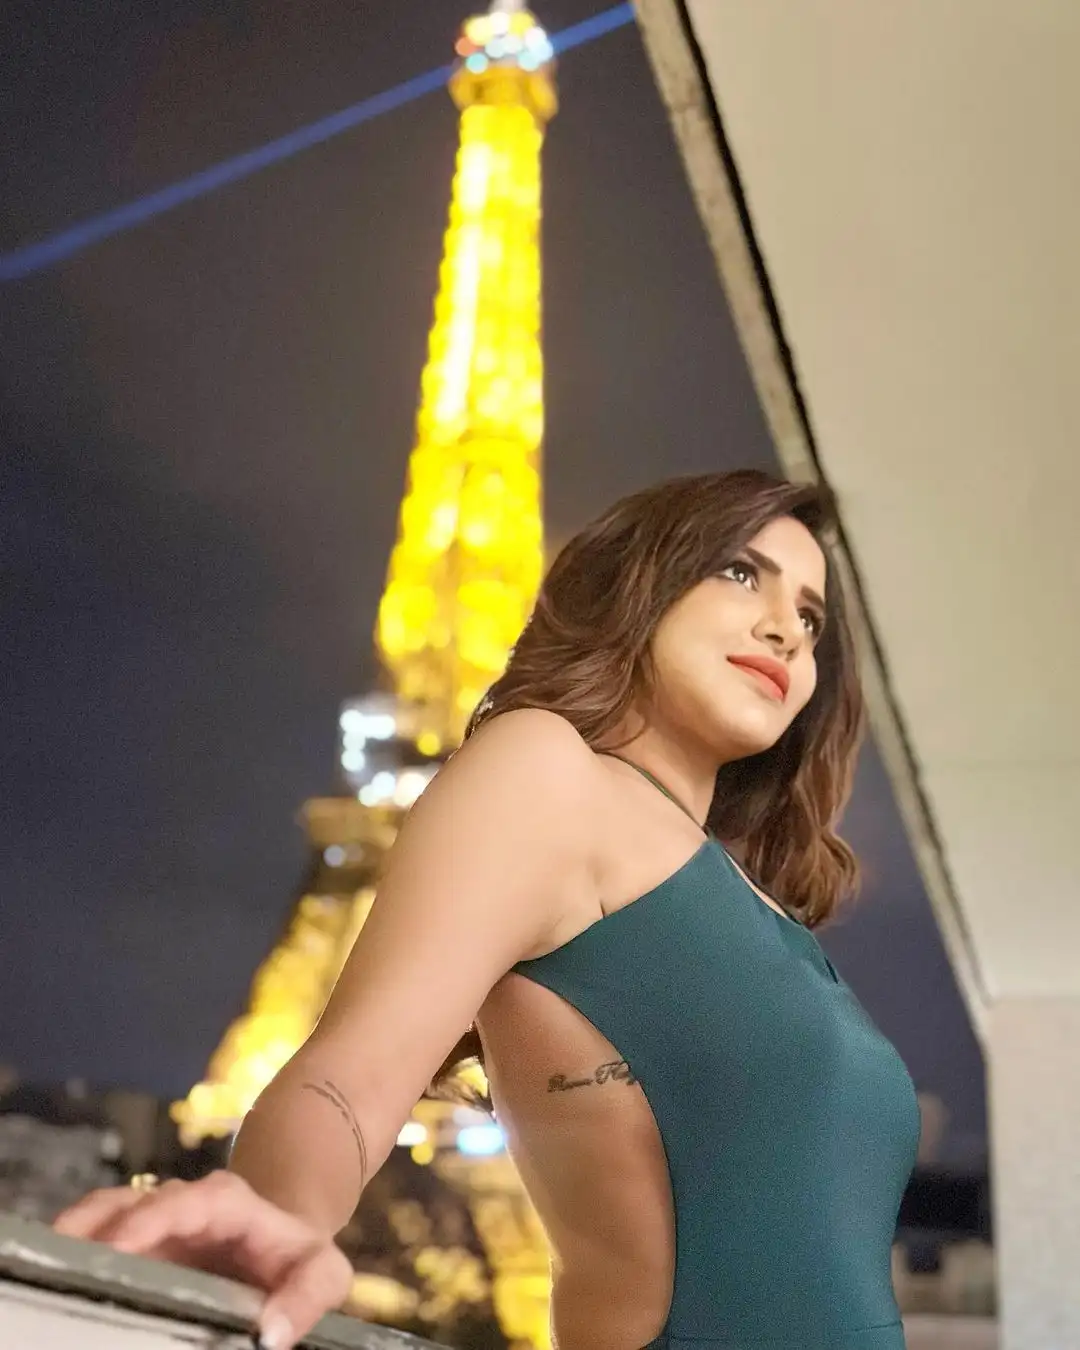 Ashu Reddy Back-less Pics In Front Of Eiffel Tower Goes Viral